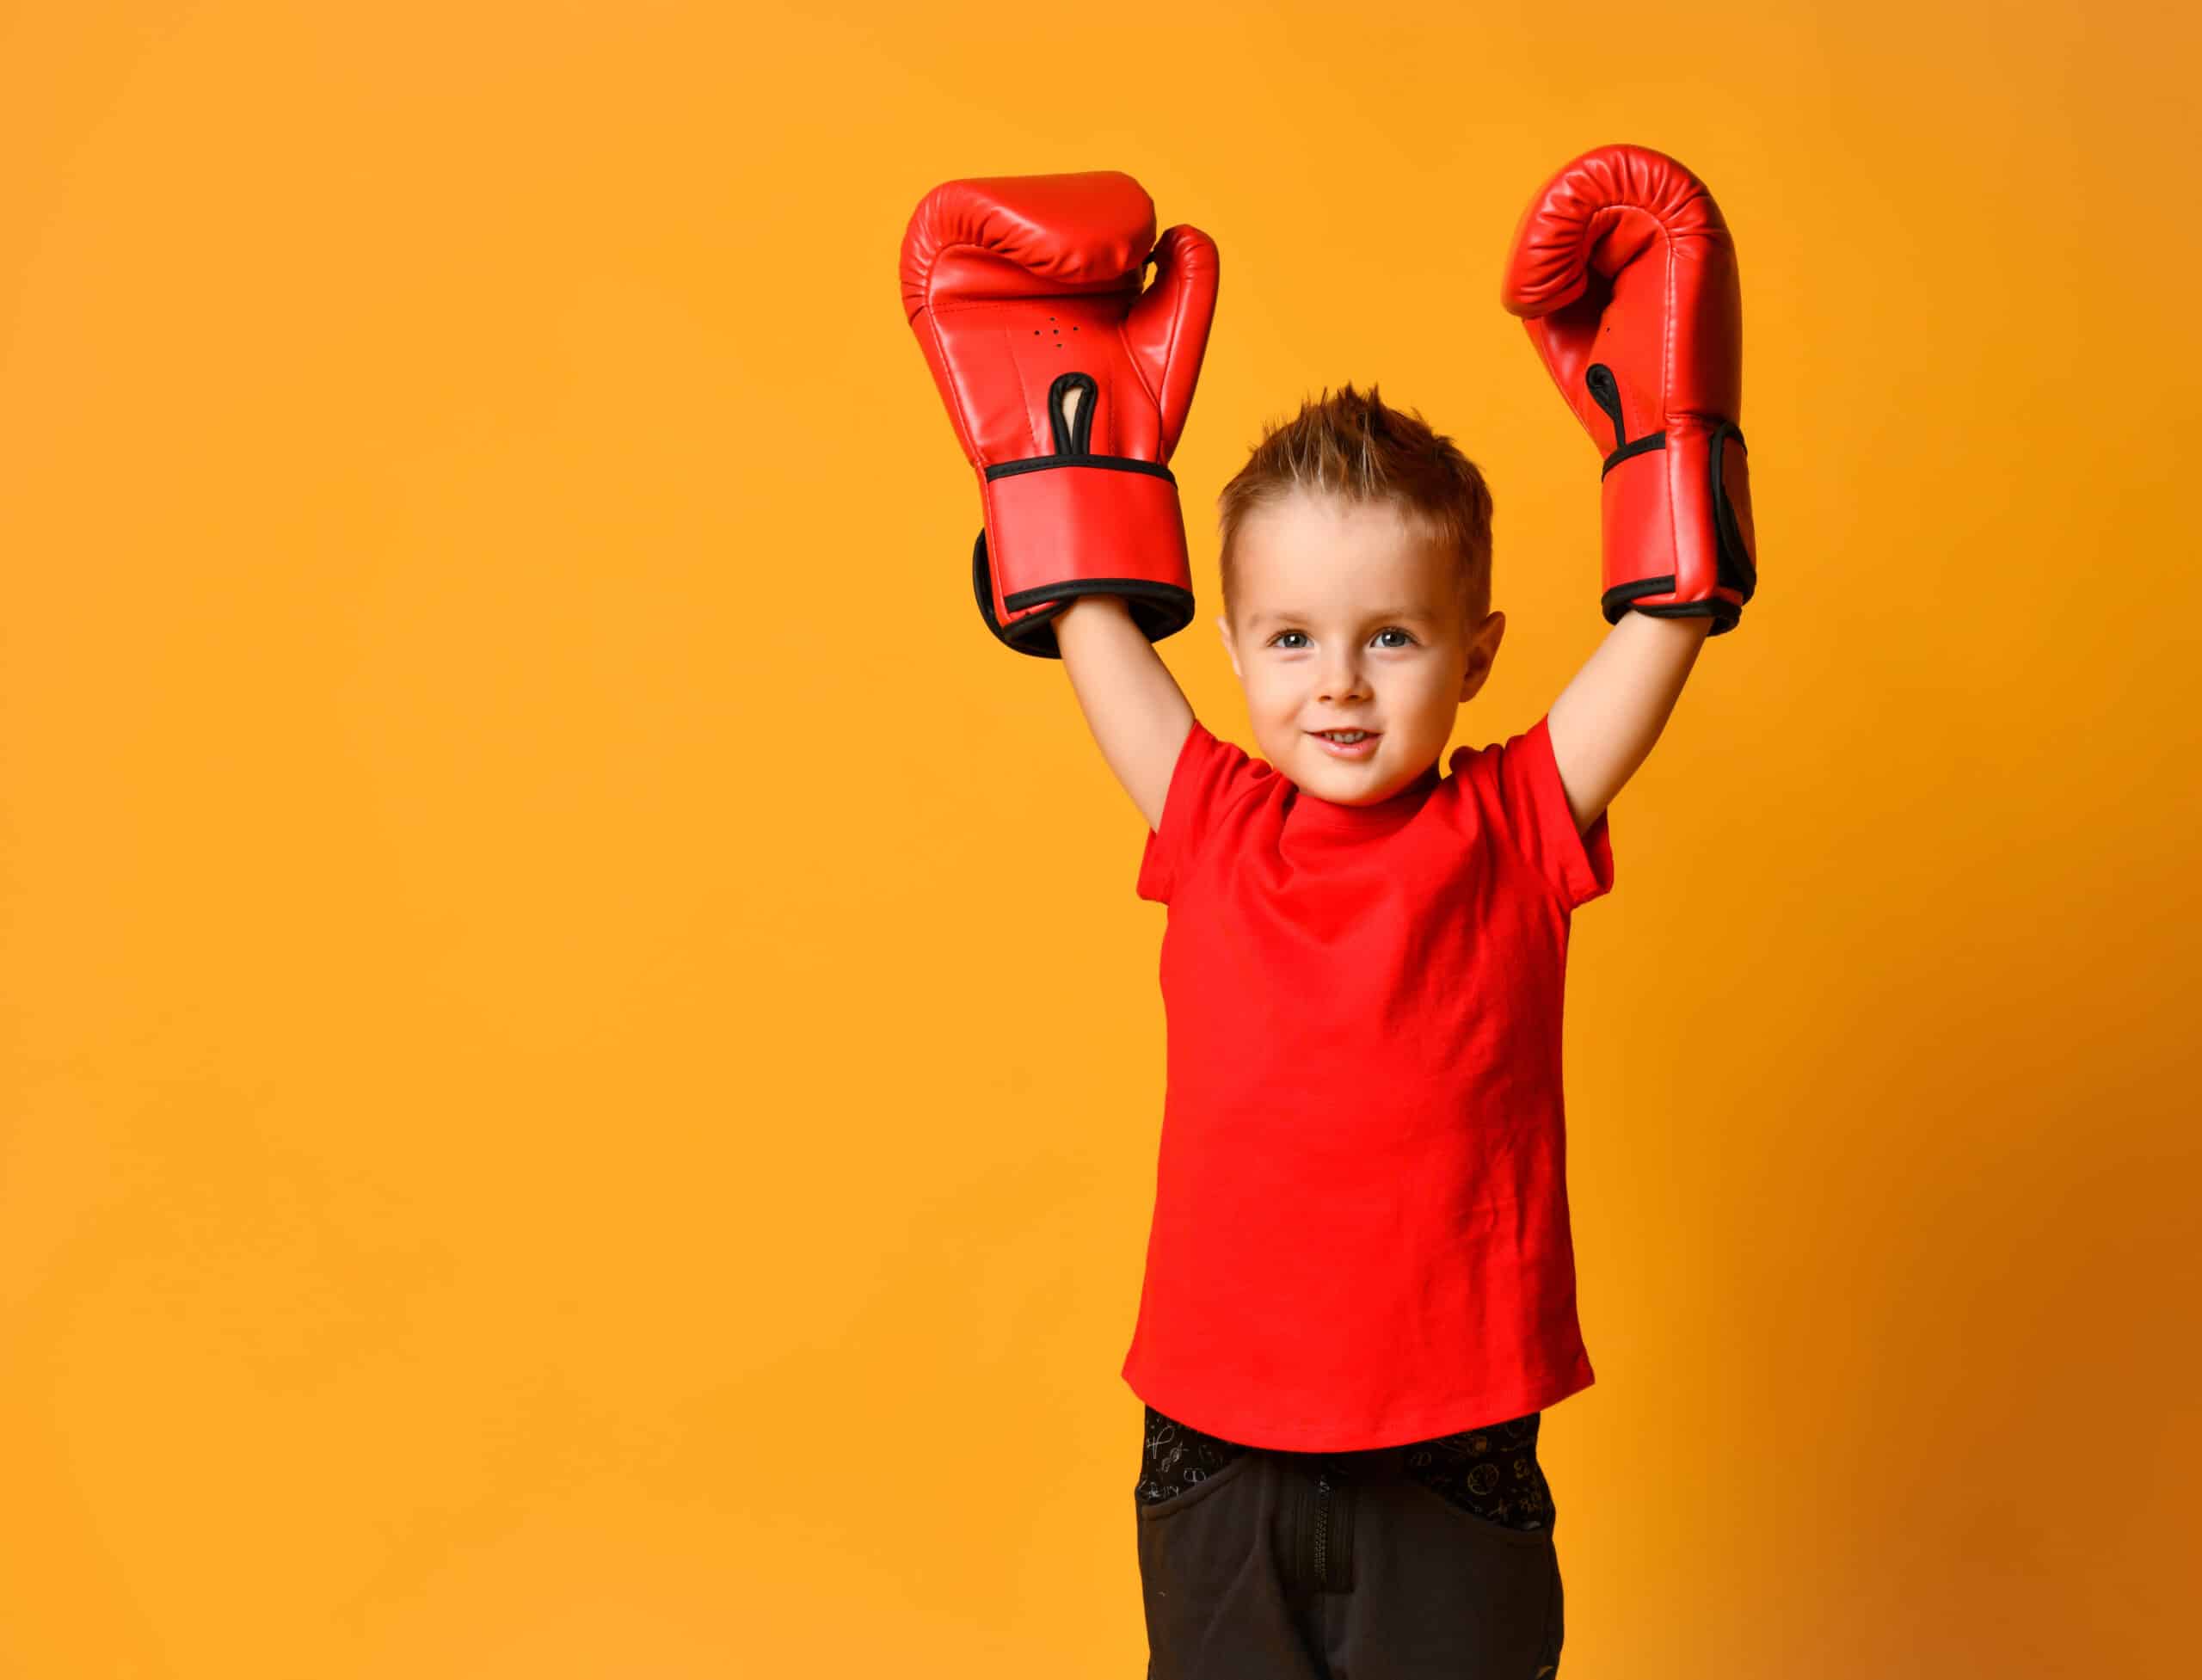 Little Cute Boy 4 years old in a red T-shirt and red boxing gloves on a yellow background, triumphantly raised his hands up, win